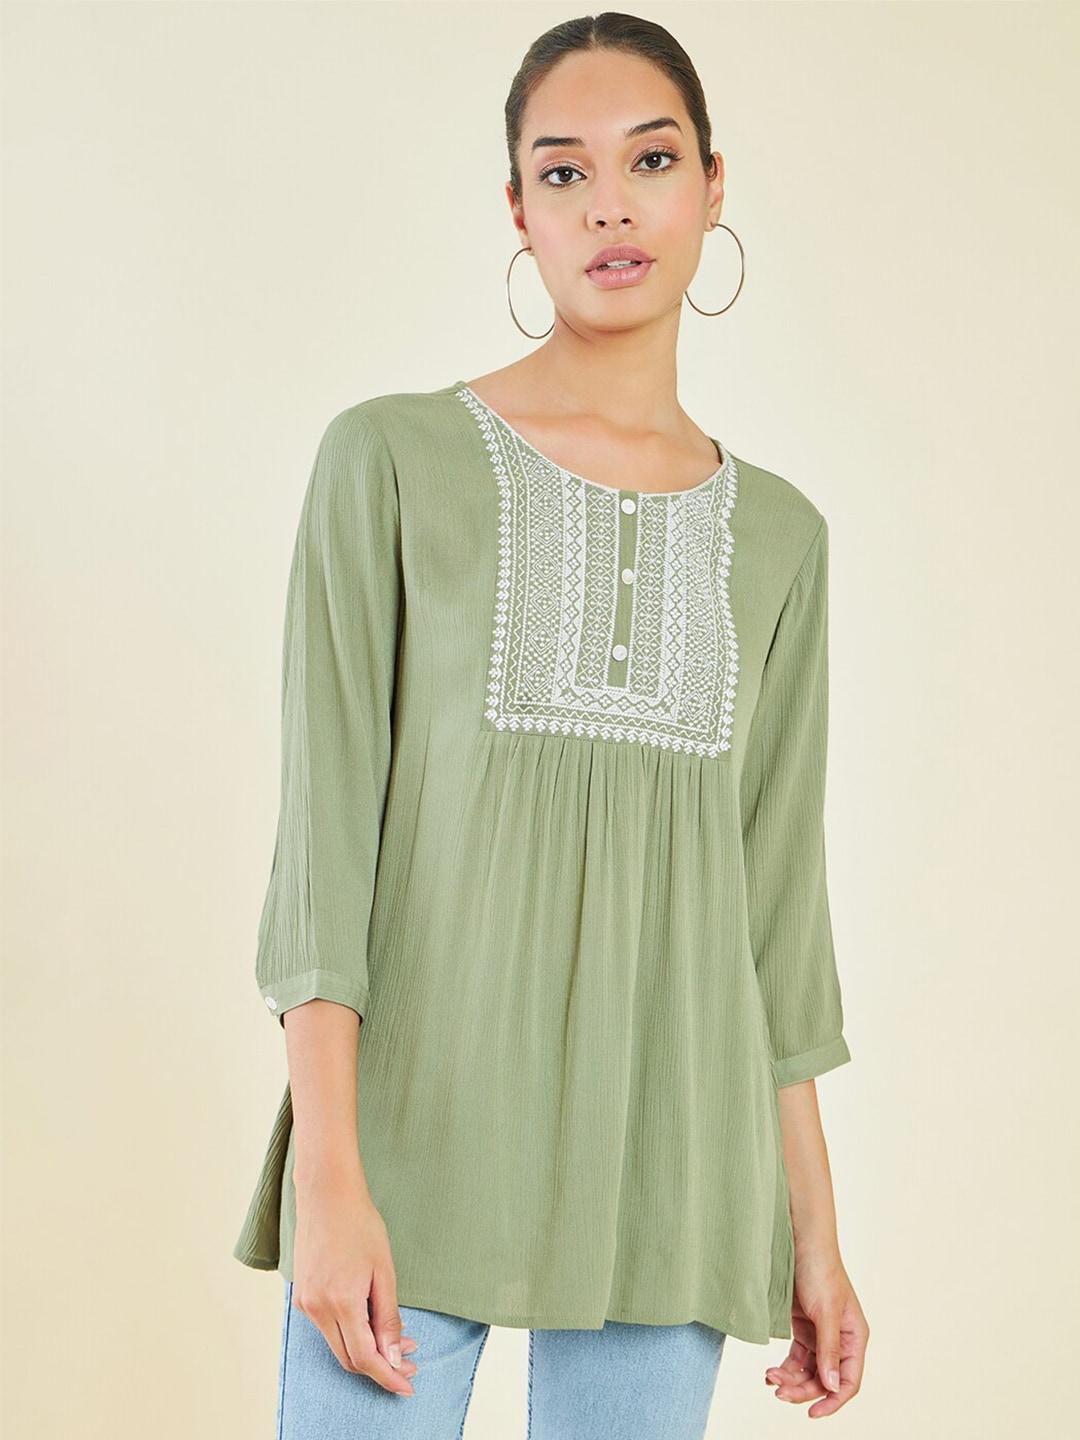 soch-green-&-white-embroidered-ethnic-tunic